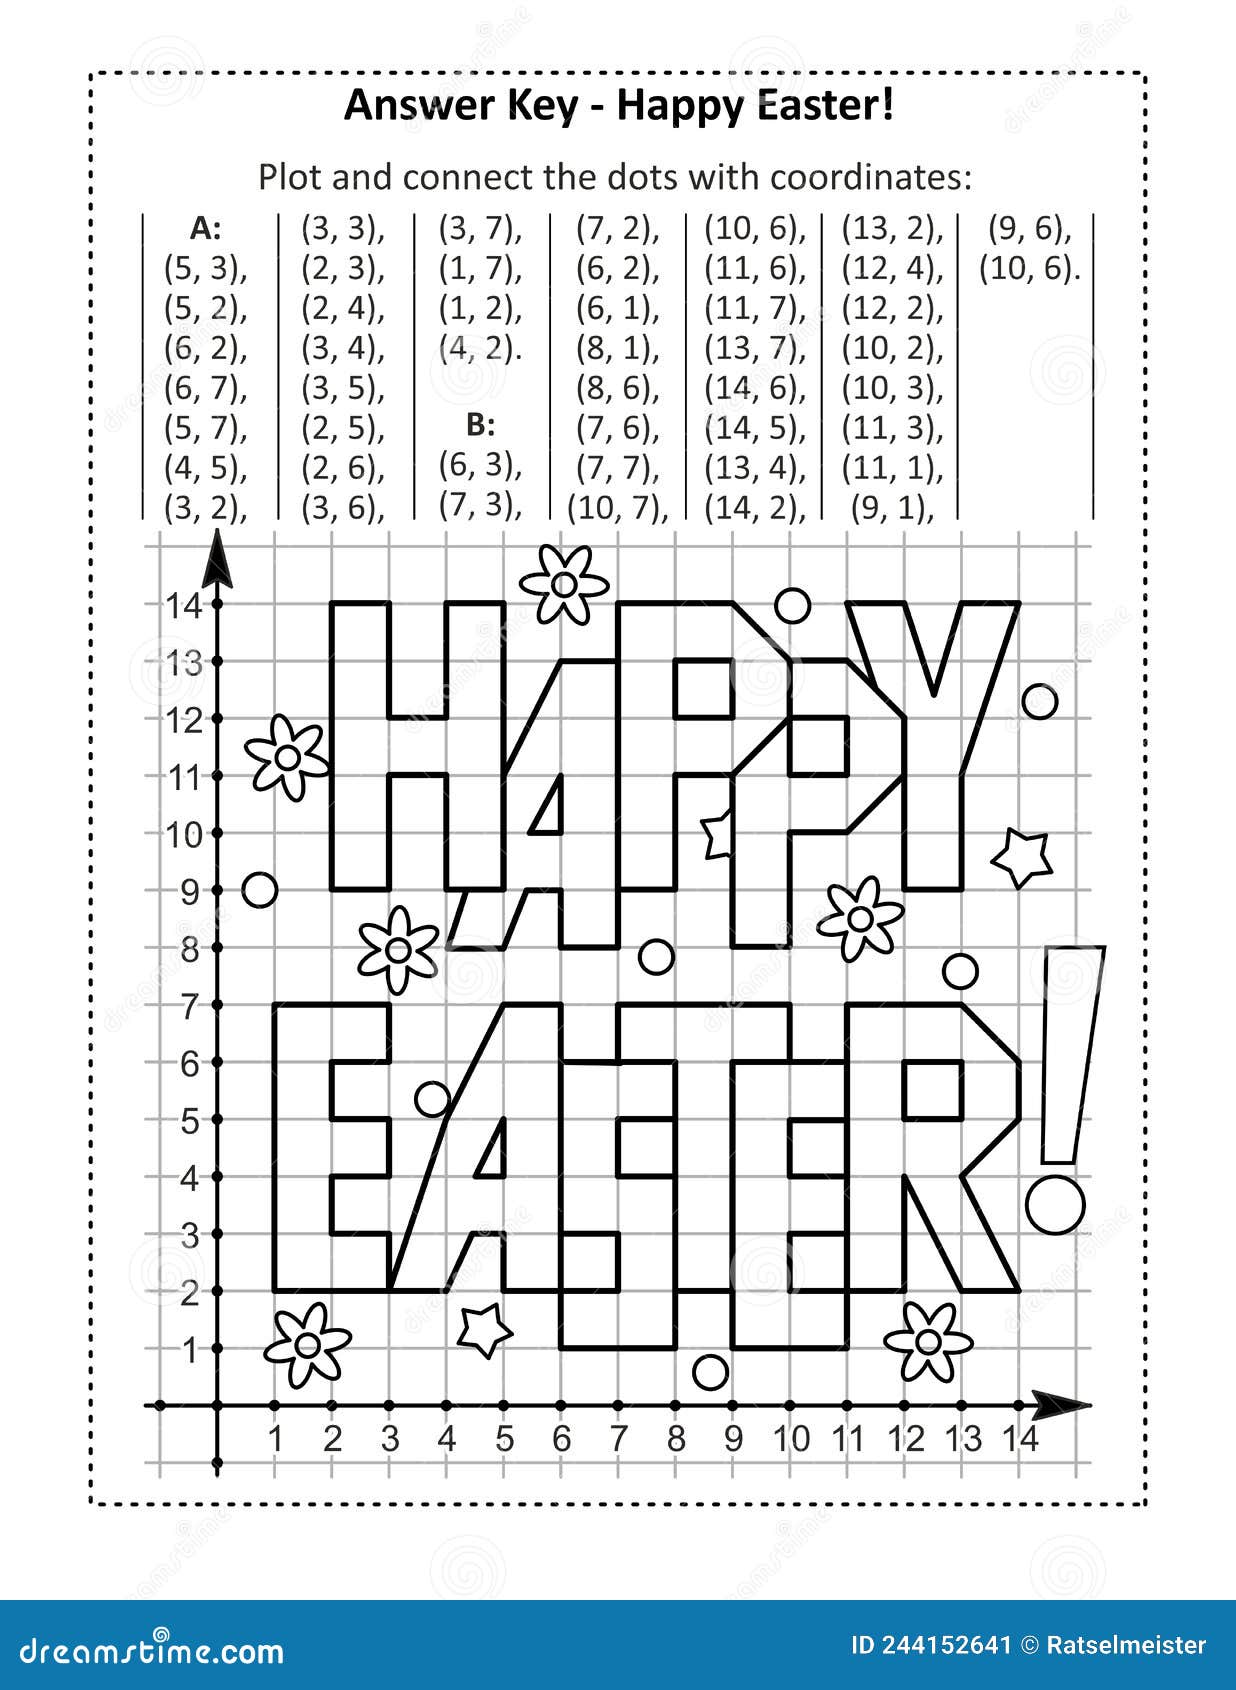 this is answer key page for coordinate graphing, or drawing by coordinates, math worksheet with `happy easter!` greeting